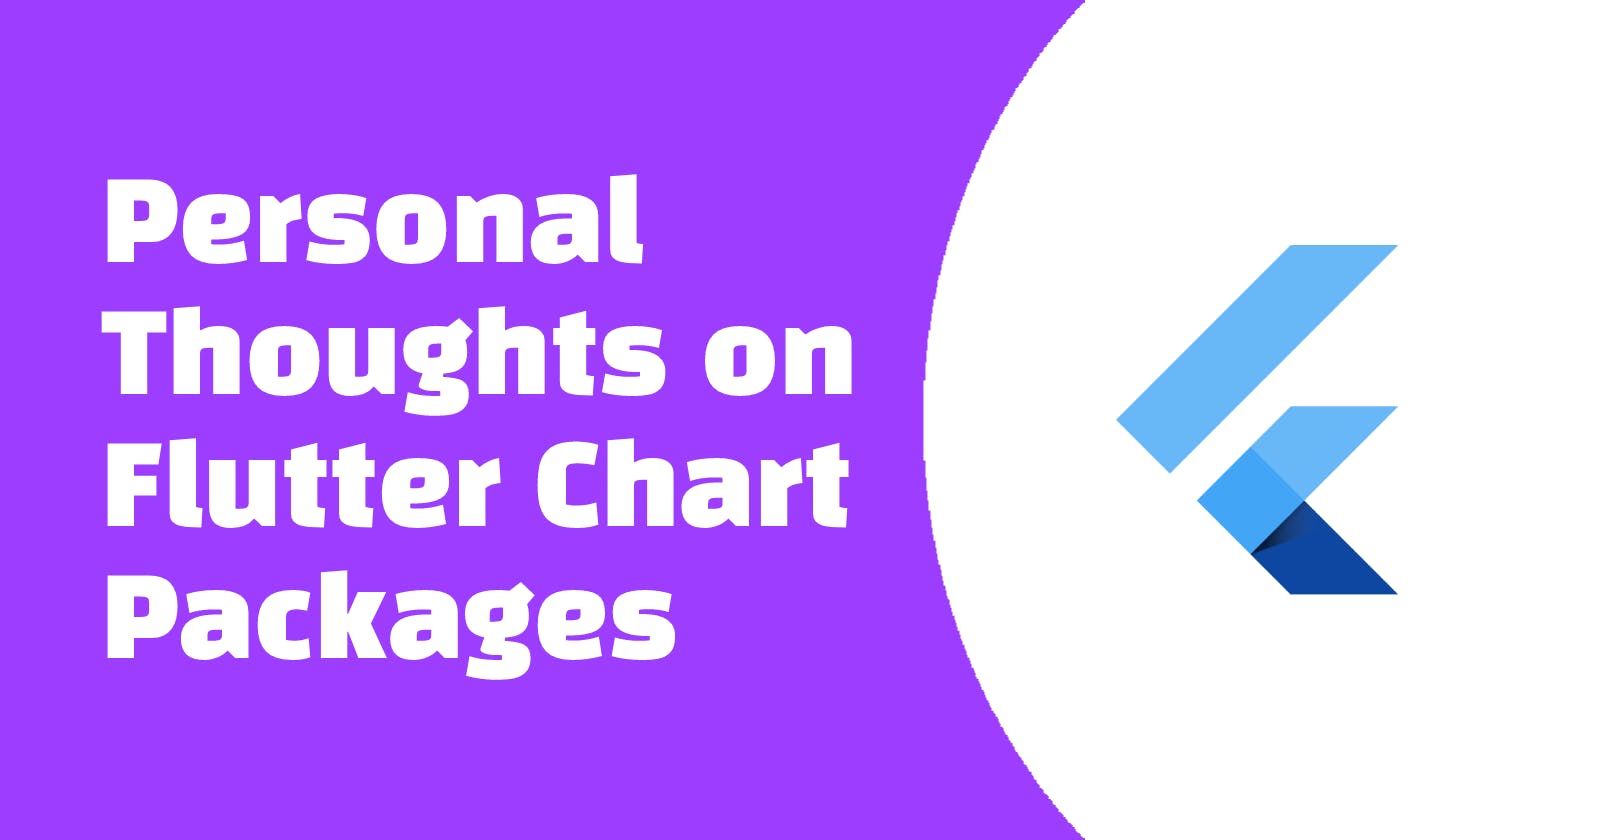 Personal Thoughts on Flutter Chart Packages